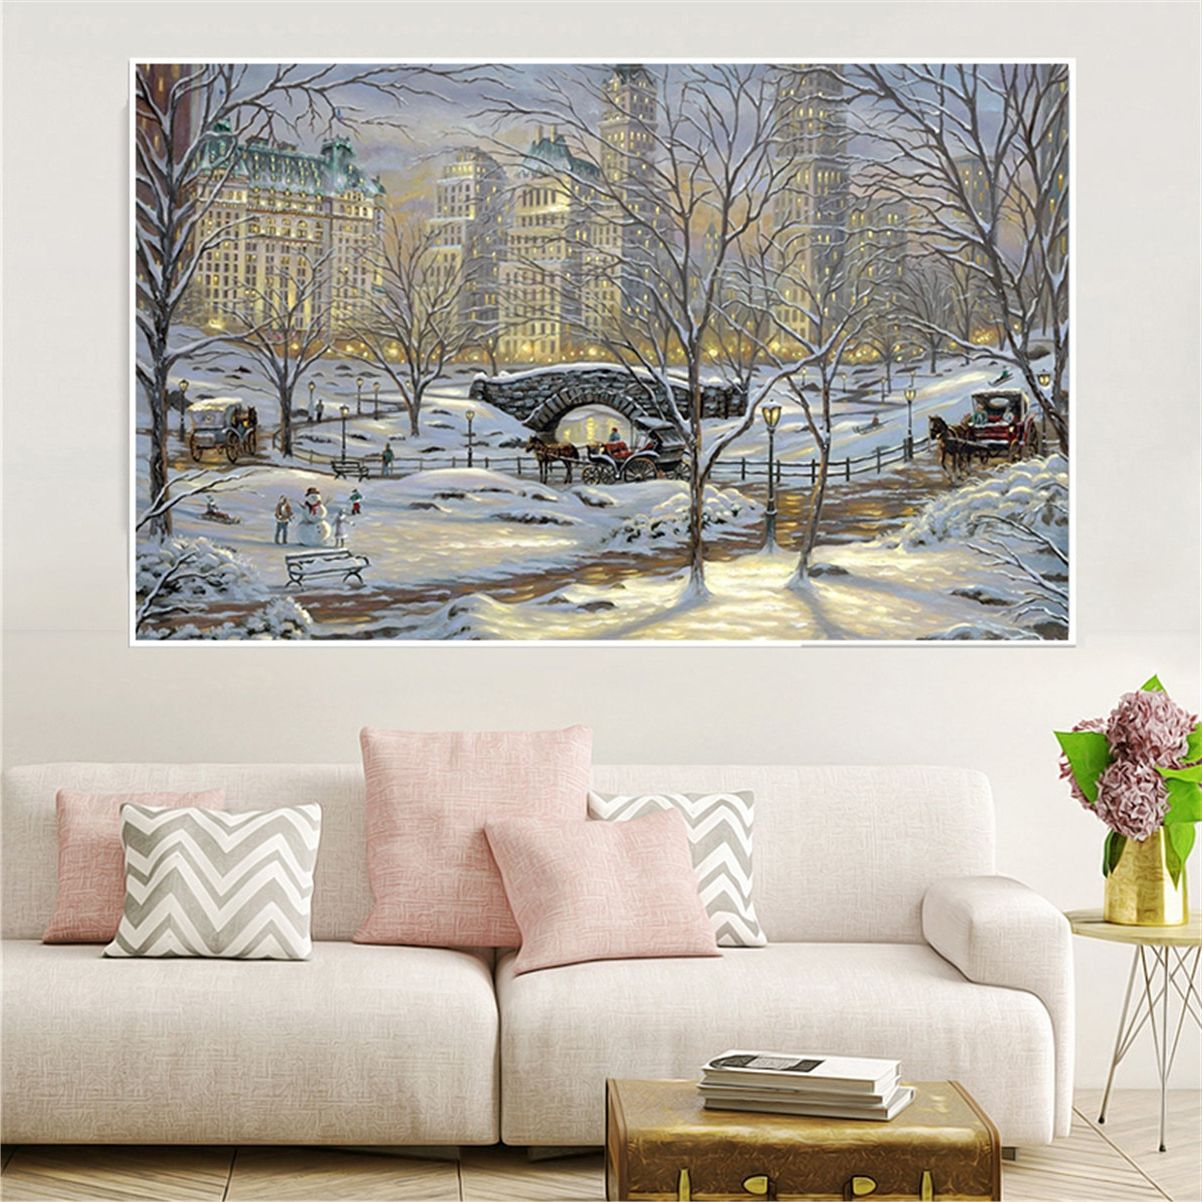 2017 Snow Wall Art Pertaining To Wall Painting Winter Snow Landscape Bridge Poster Prints (View 5 of 20)